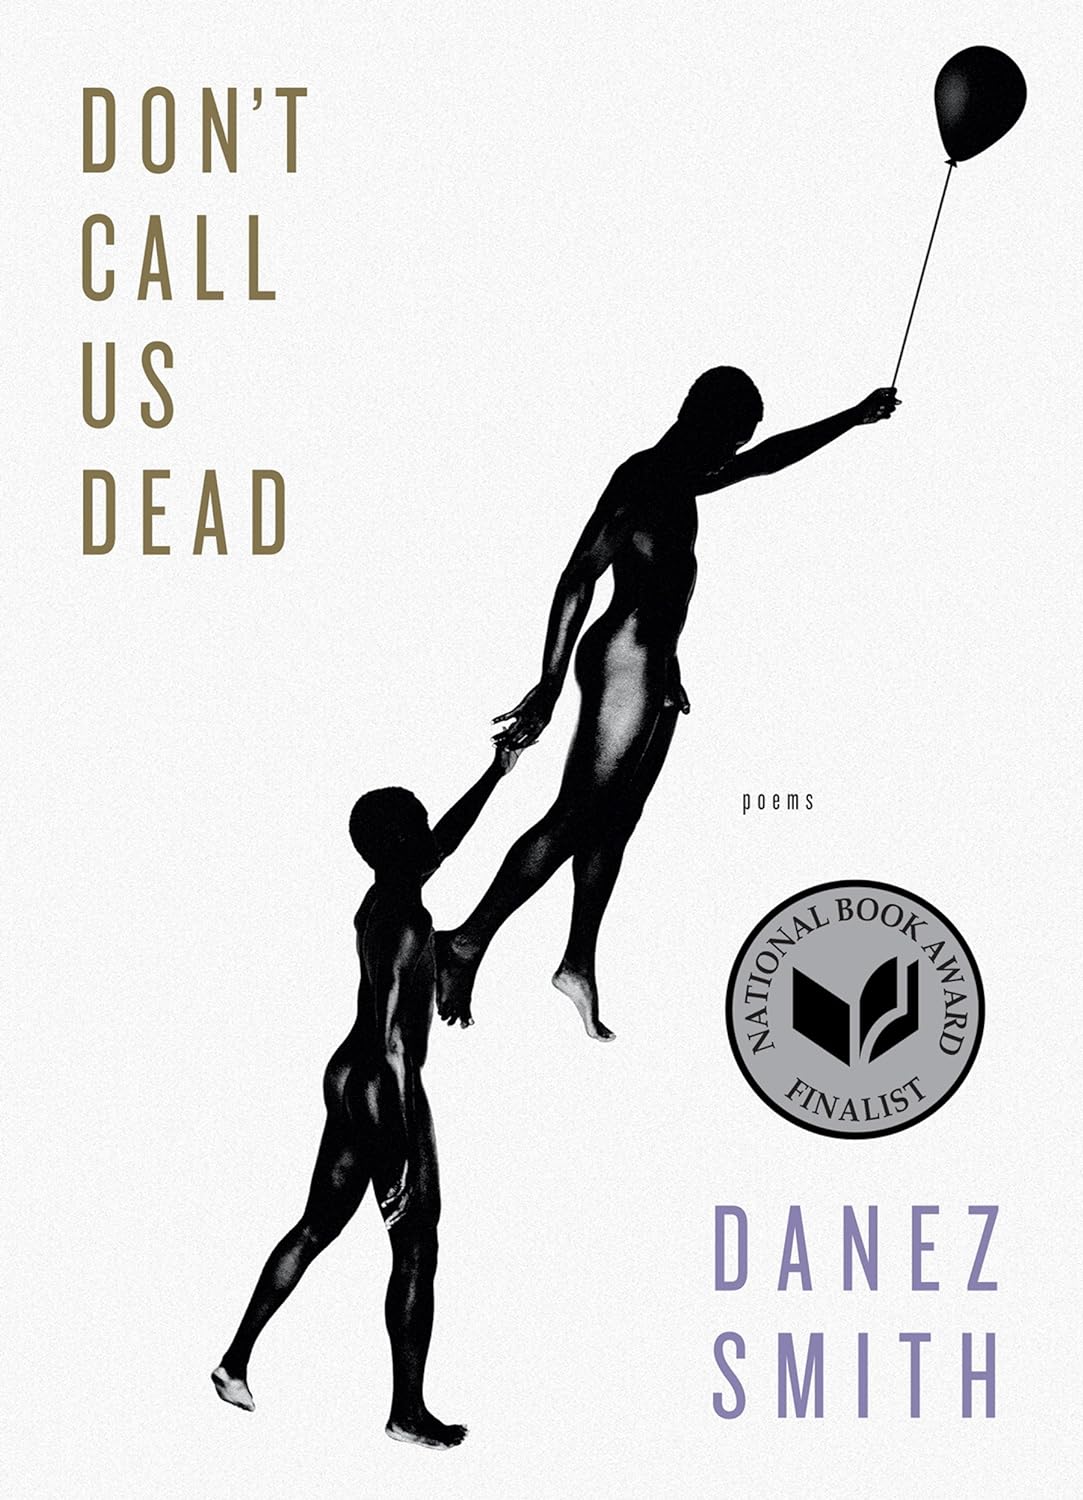 Don't Call Us Dead by Danez Smith